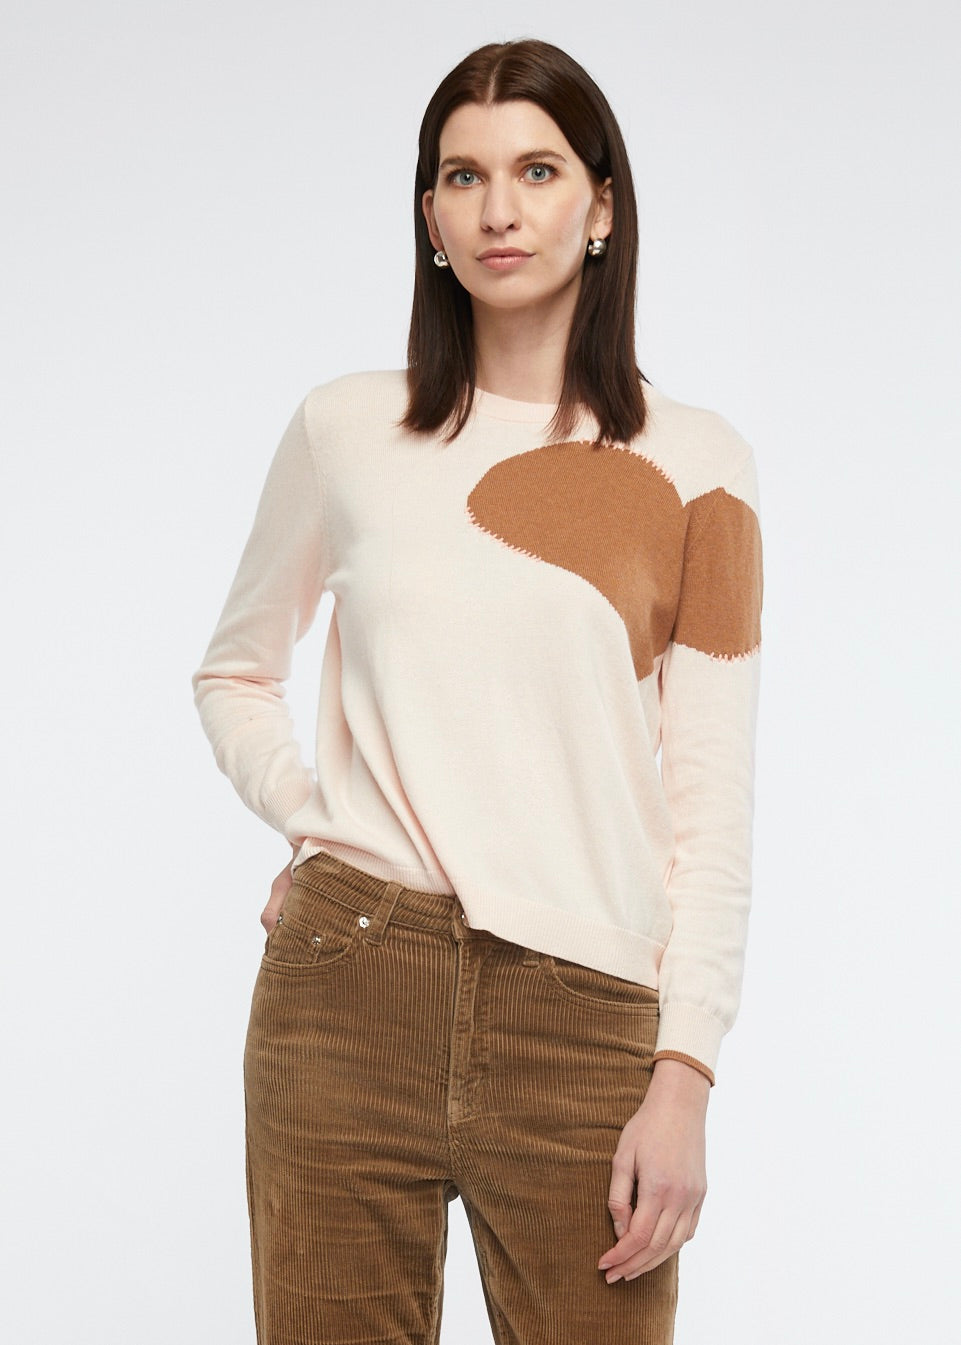 Hearts patch jumper by Zaket & Plover in Blossom